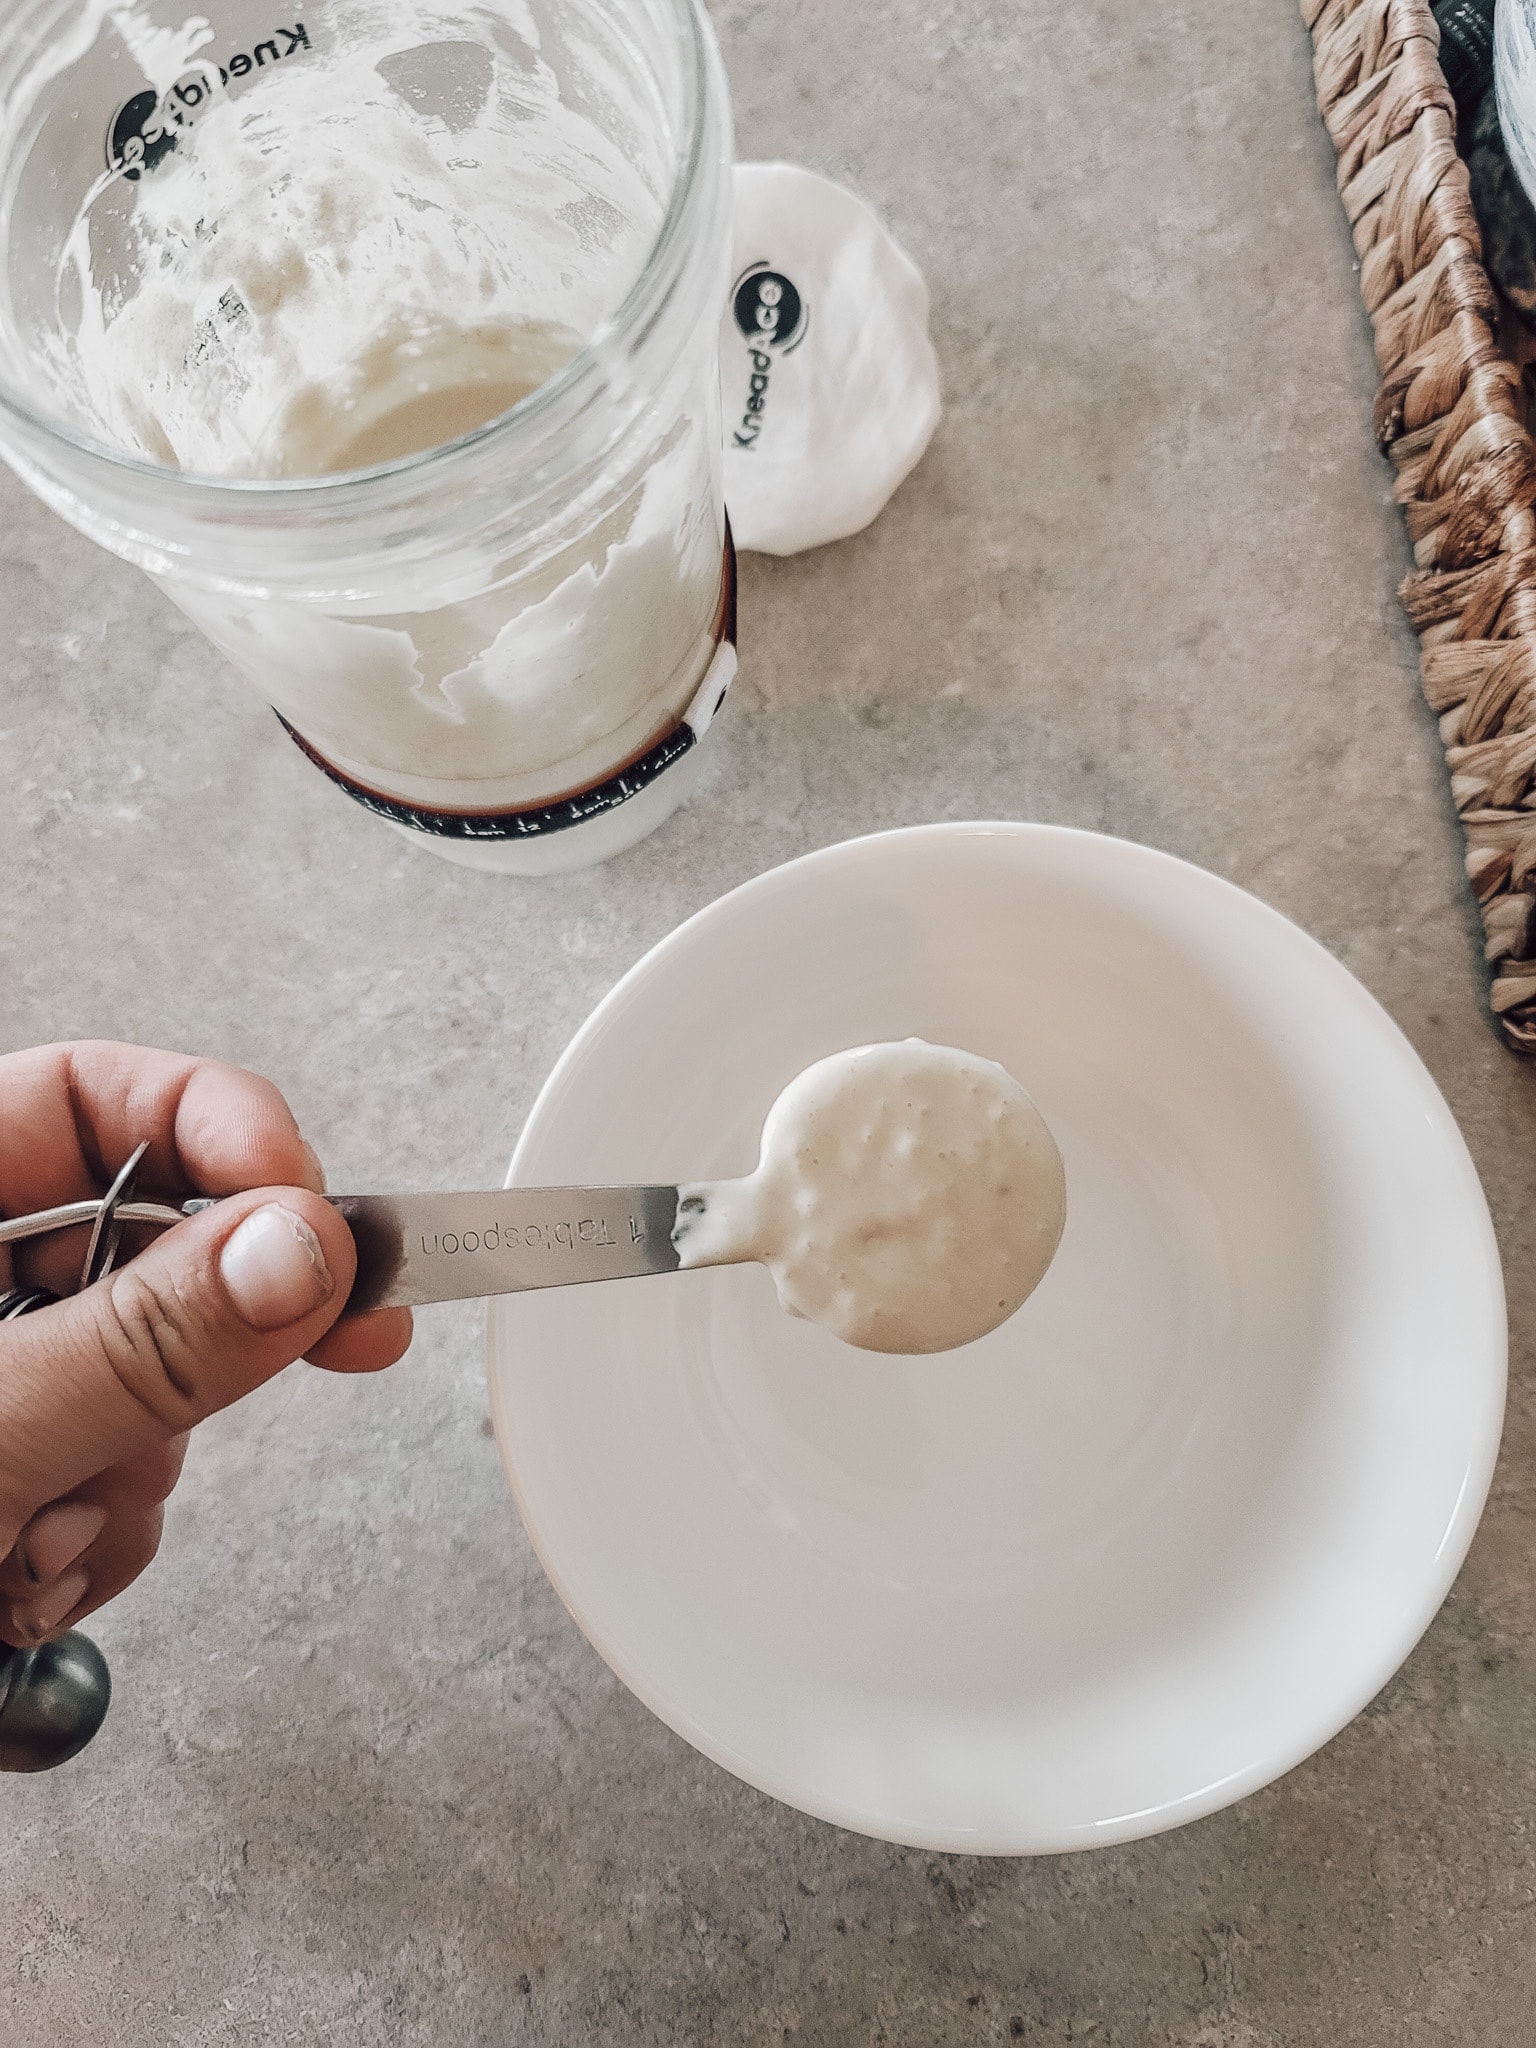 Feeding your starter - 12 hours before you mix your bread dough, make your starter. This makes roughly 1 cup of starter. Add 1 ½ tbsp of starter to a clean jar or bowl. Add ¾ cup of all-purpose einkorn flour and ½ cup filtered water. Einkorn Sourdough Bread 